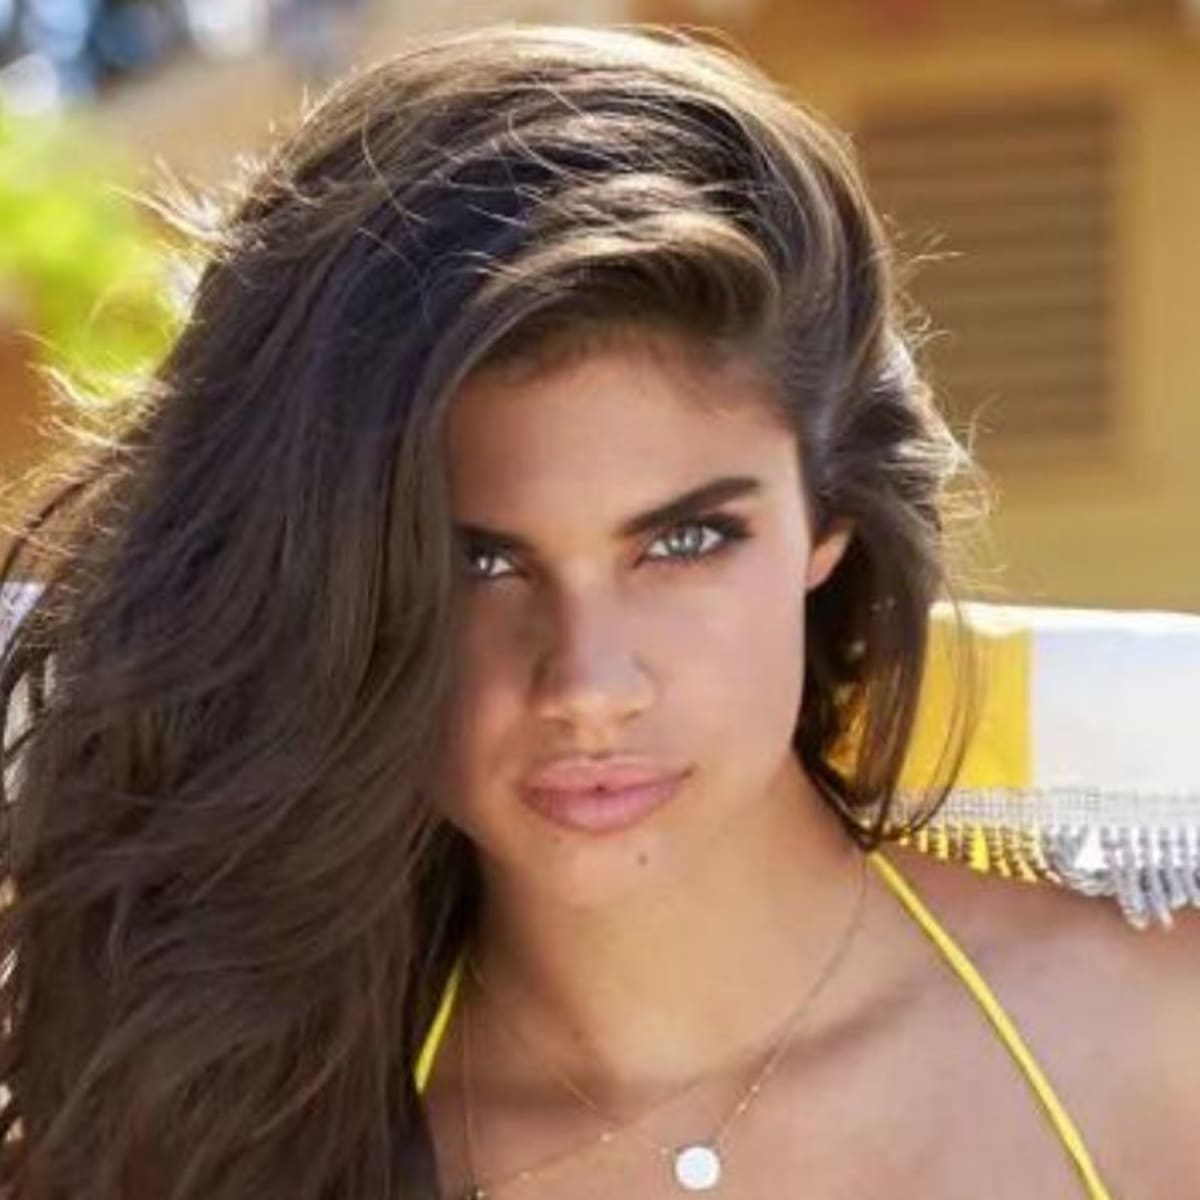 6 Colorful Looks From Sara Sampaio's SI Swim Photoshoot on the